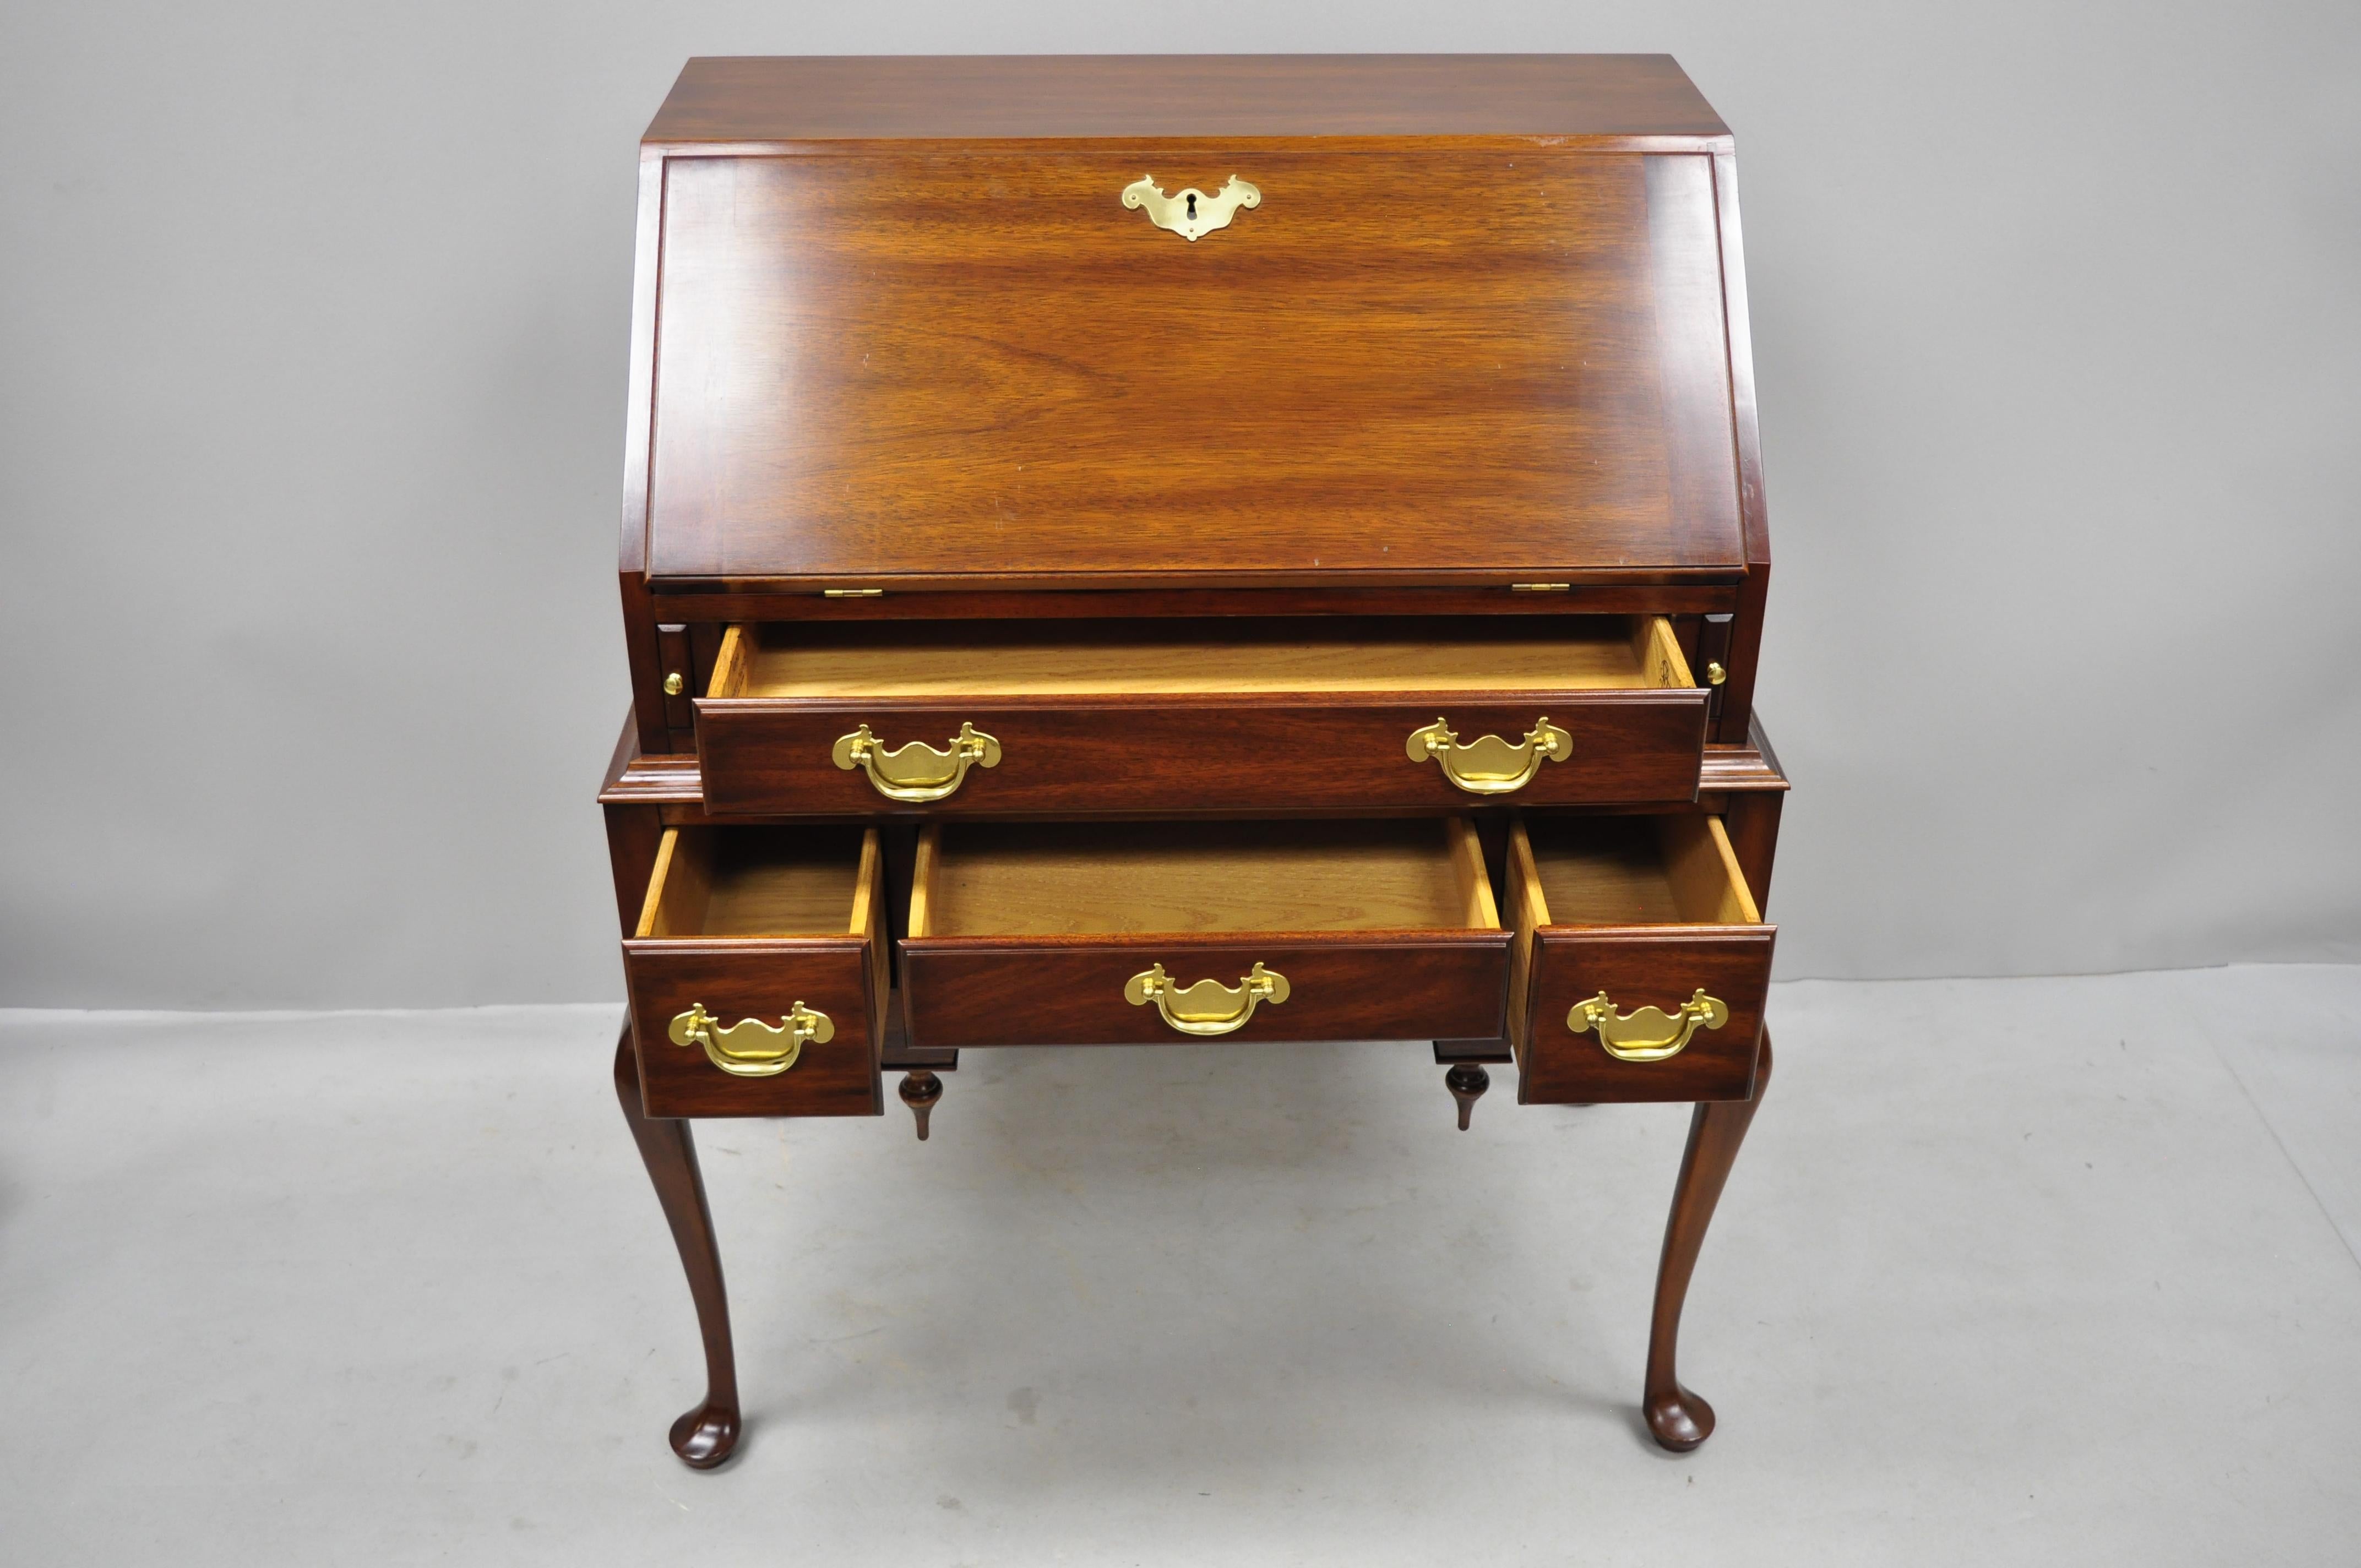 Henkel Harris mahogany Queen Anne style slant front secretary desk. Item features solid wood construction, beautiful wood grain, original label, working lock and key, 4 dovetailed drawers, shapely Queen Anne legs, solid brass hardware, quality